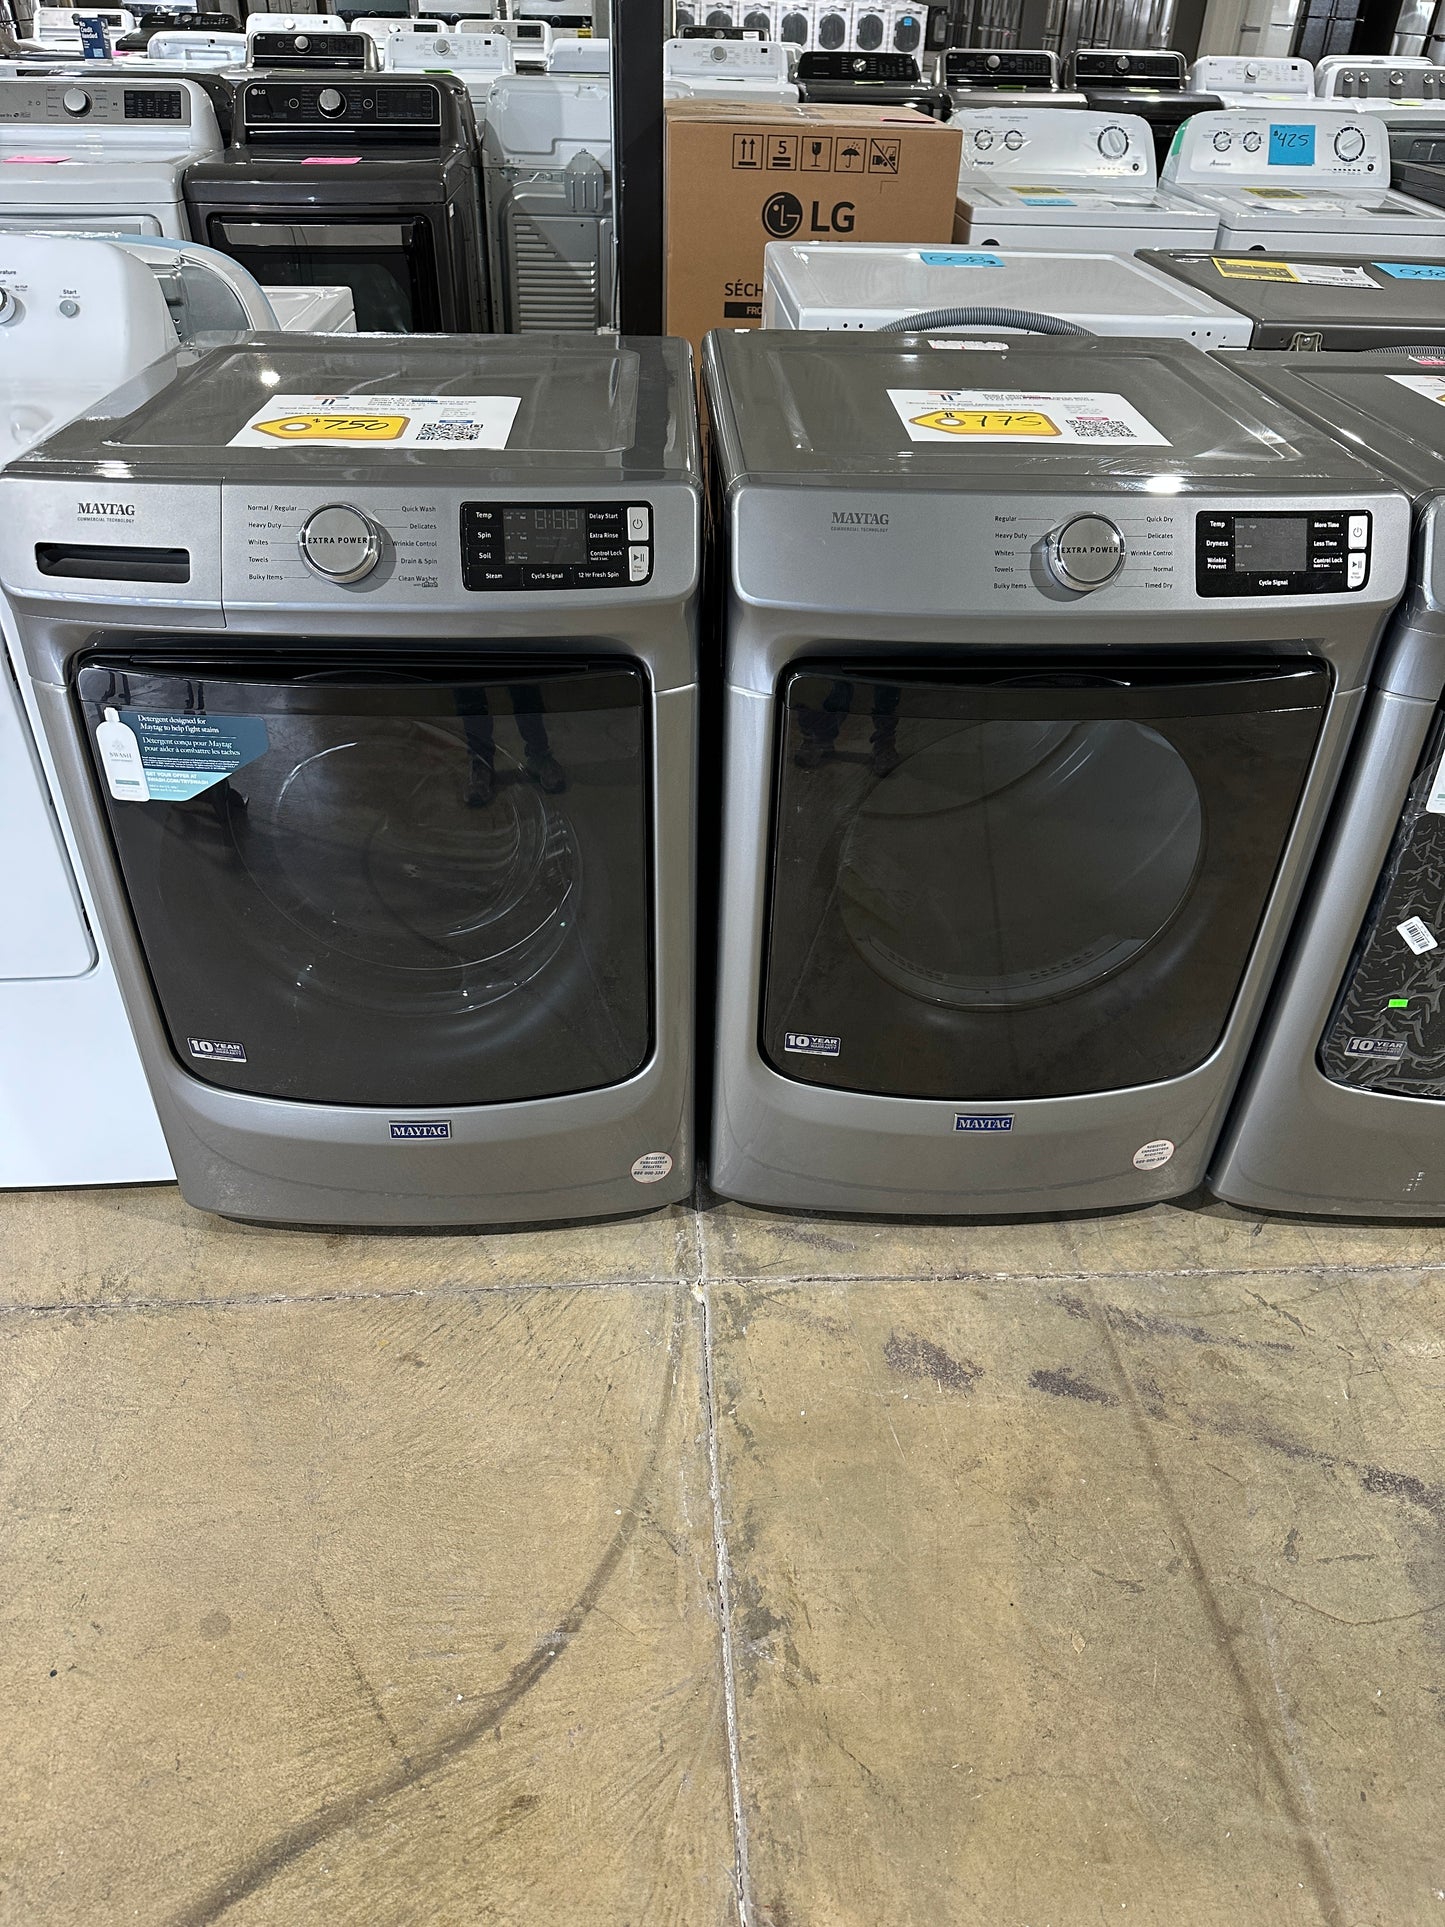 GREAT NEW MAYTAG FRONT LOAD WASHER DRYER SET - DRY11718S